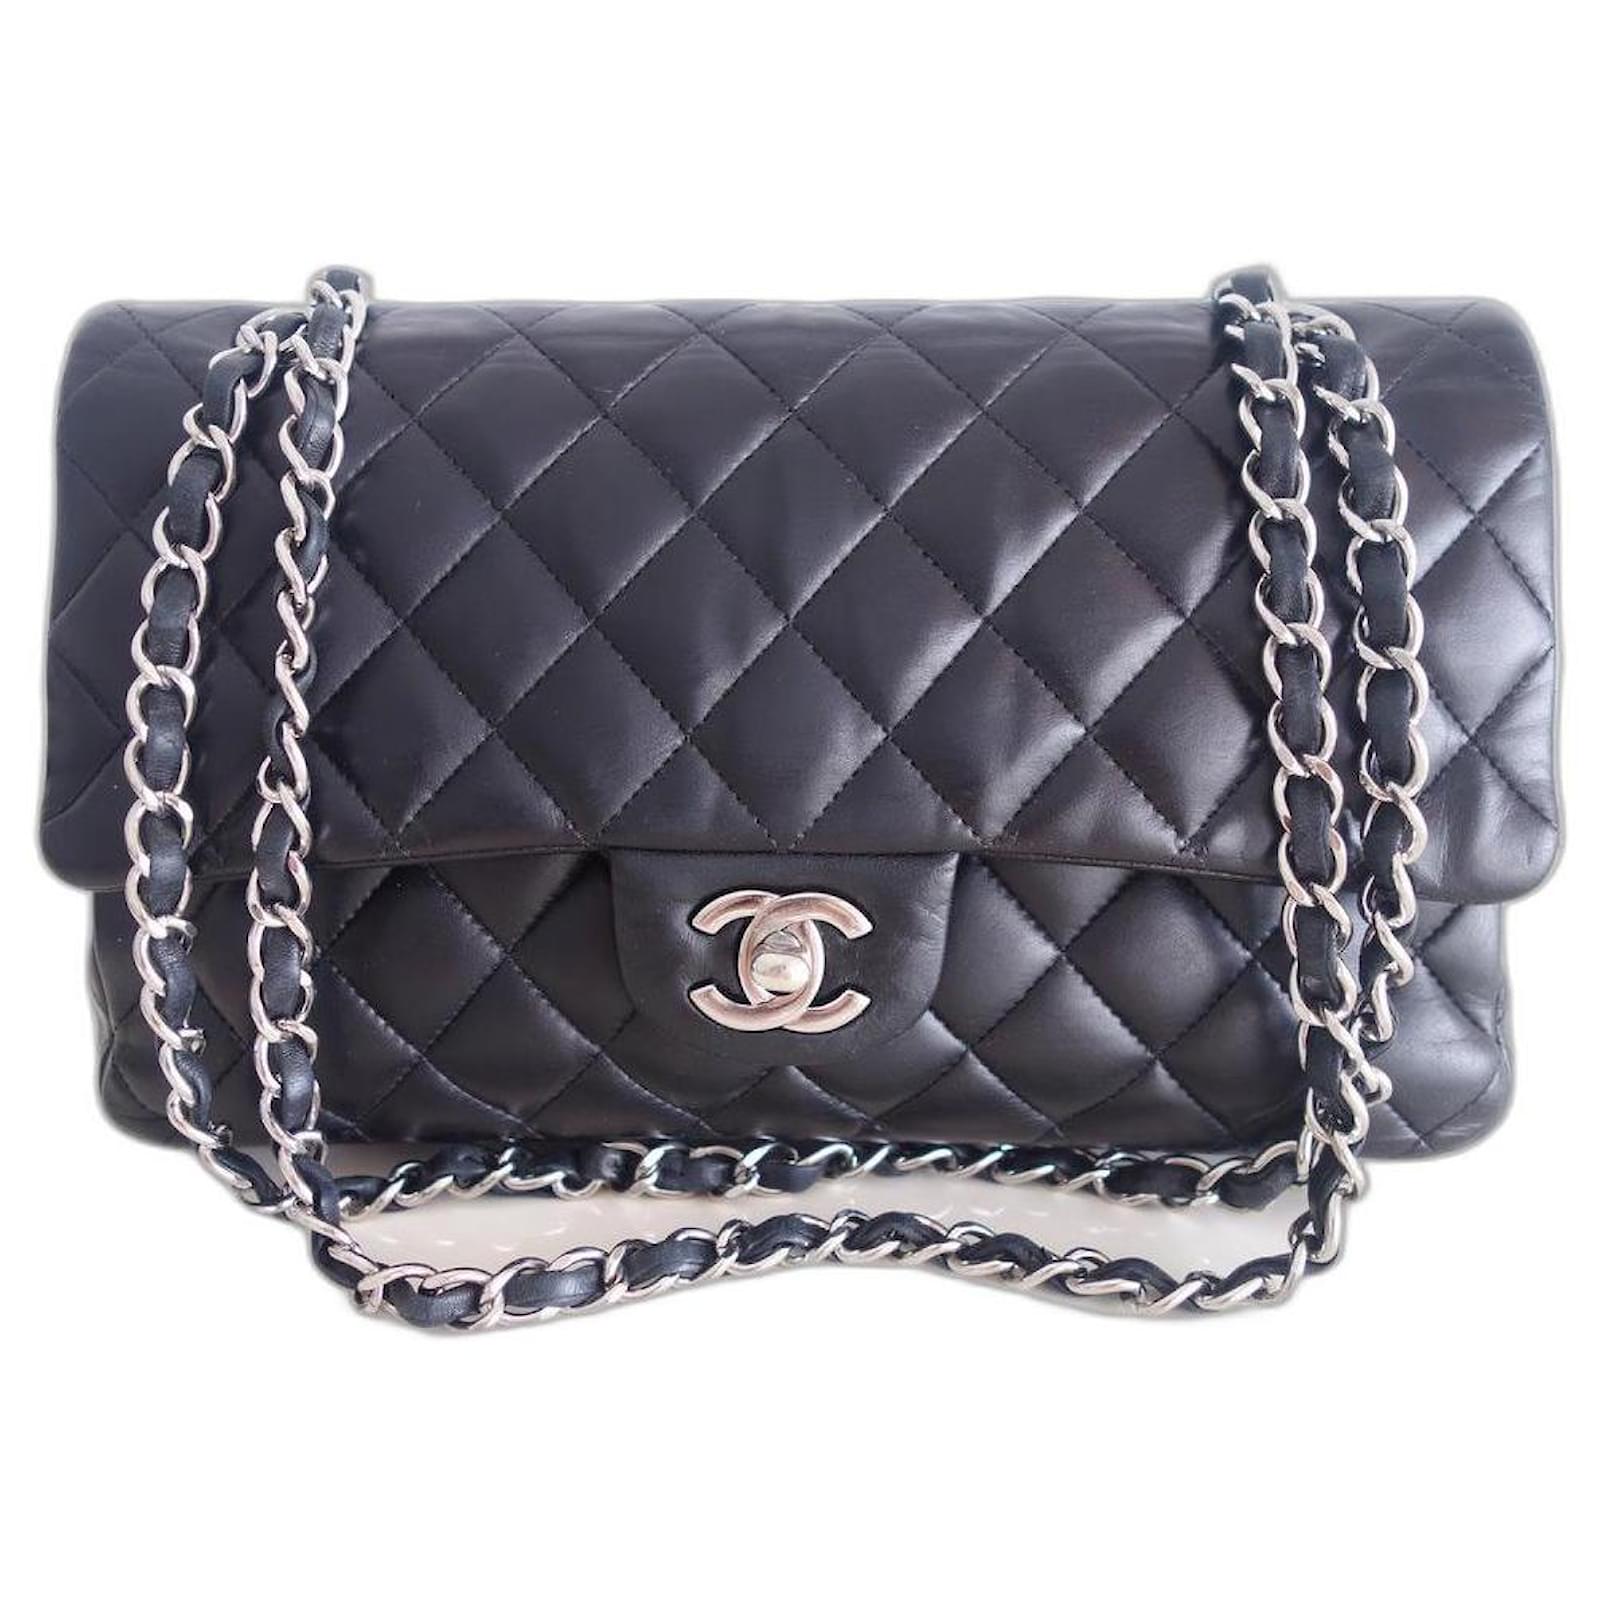 blue and white chanel bag black